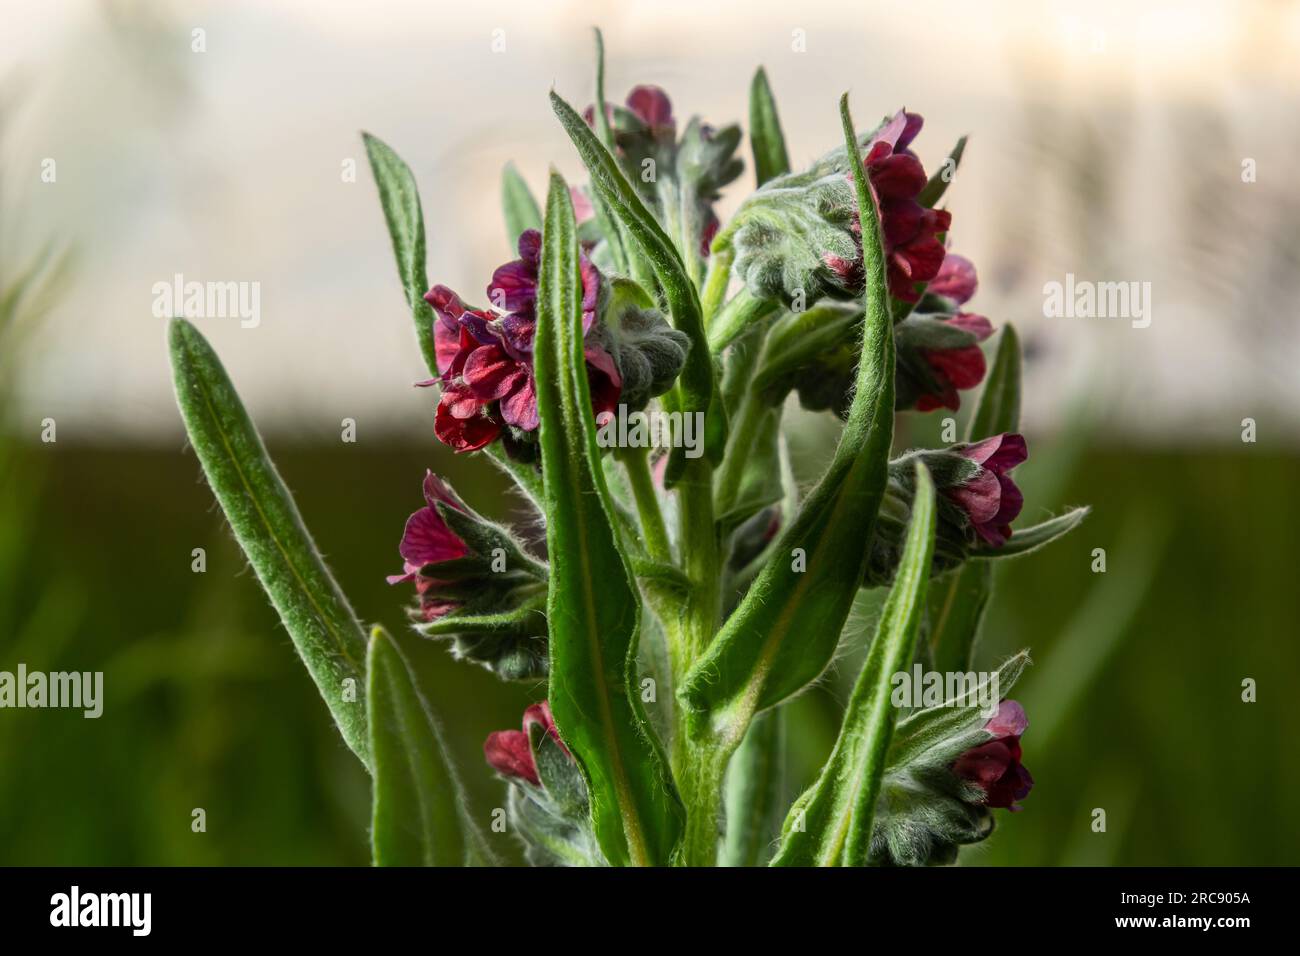 In the wild, Cynoglossum officinale blooms among grasses. A close-up of the colorful flowers of the common sedum in a typical habitat. Stock Photo